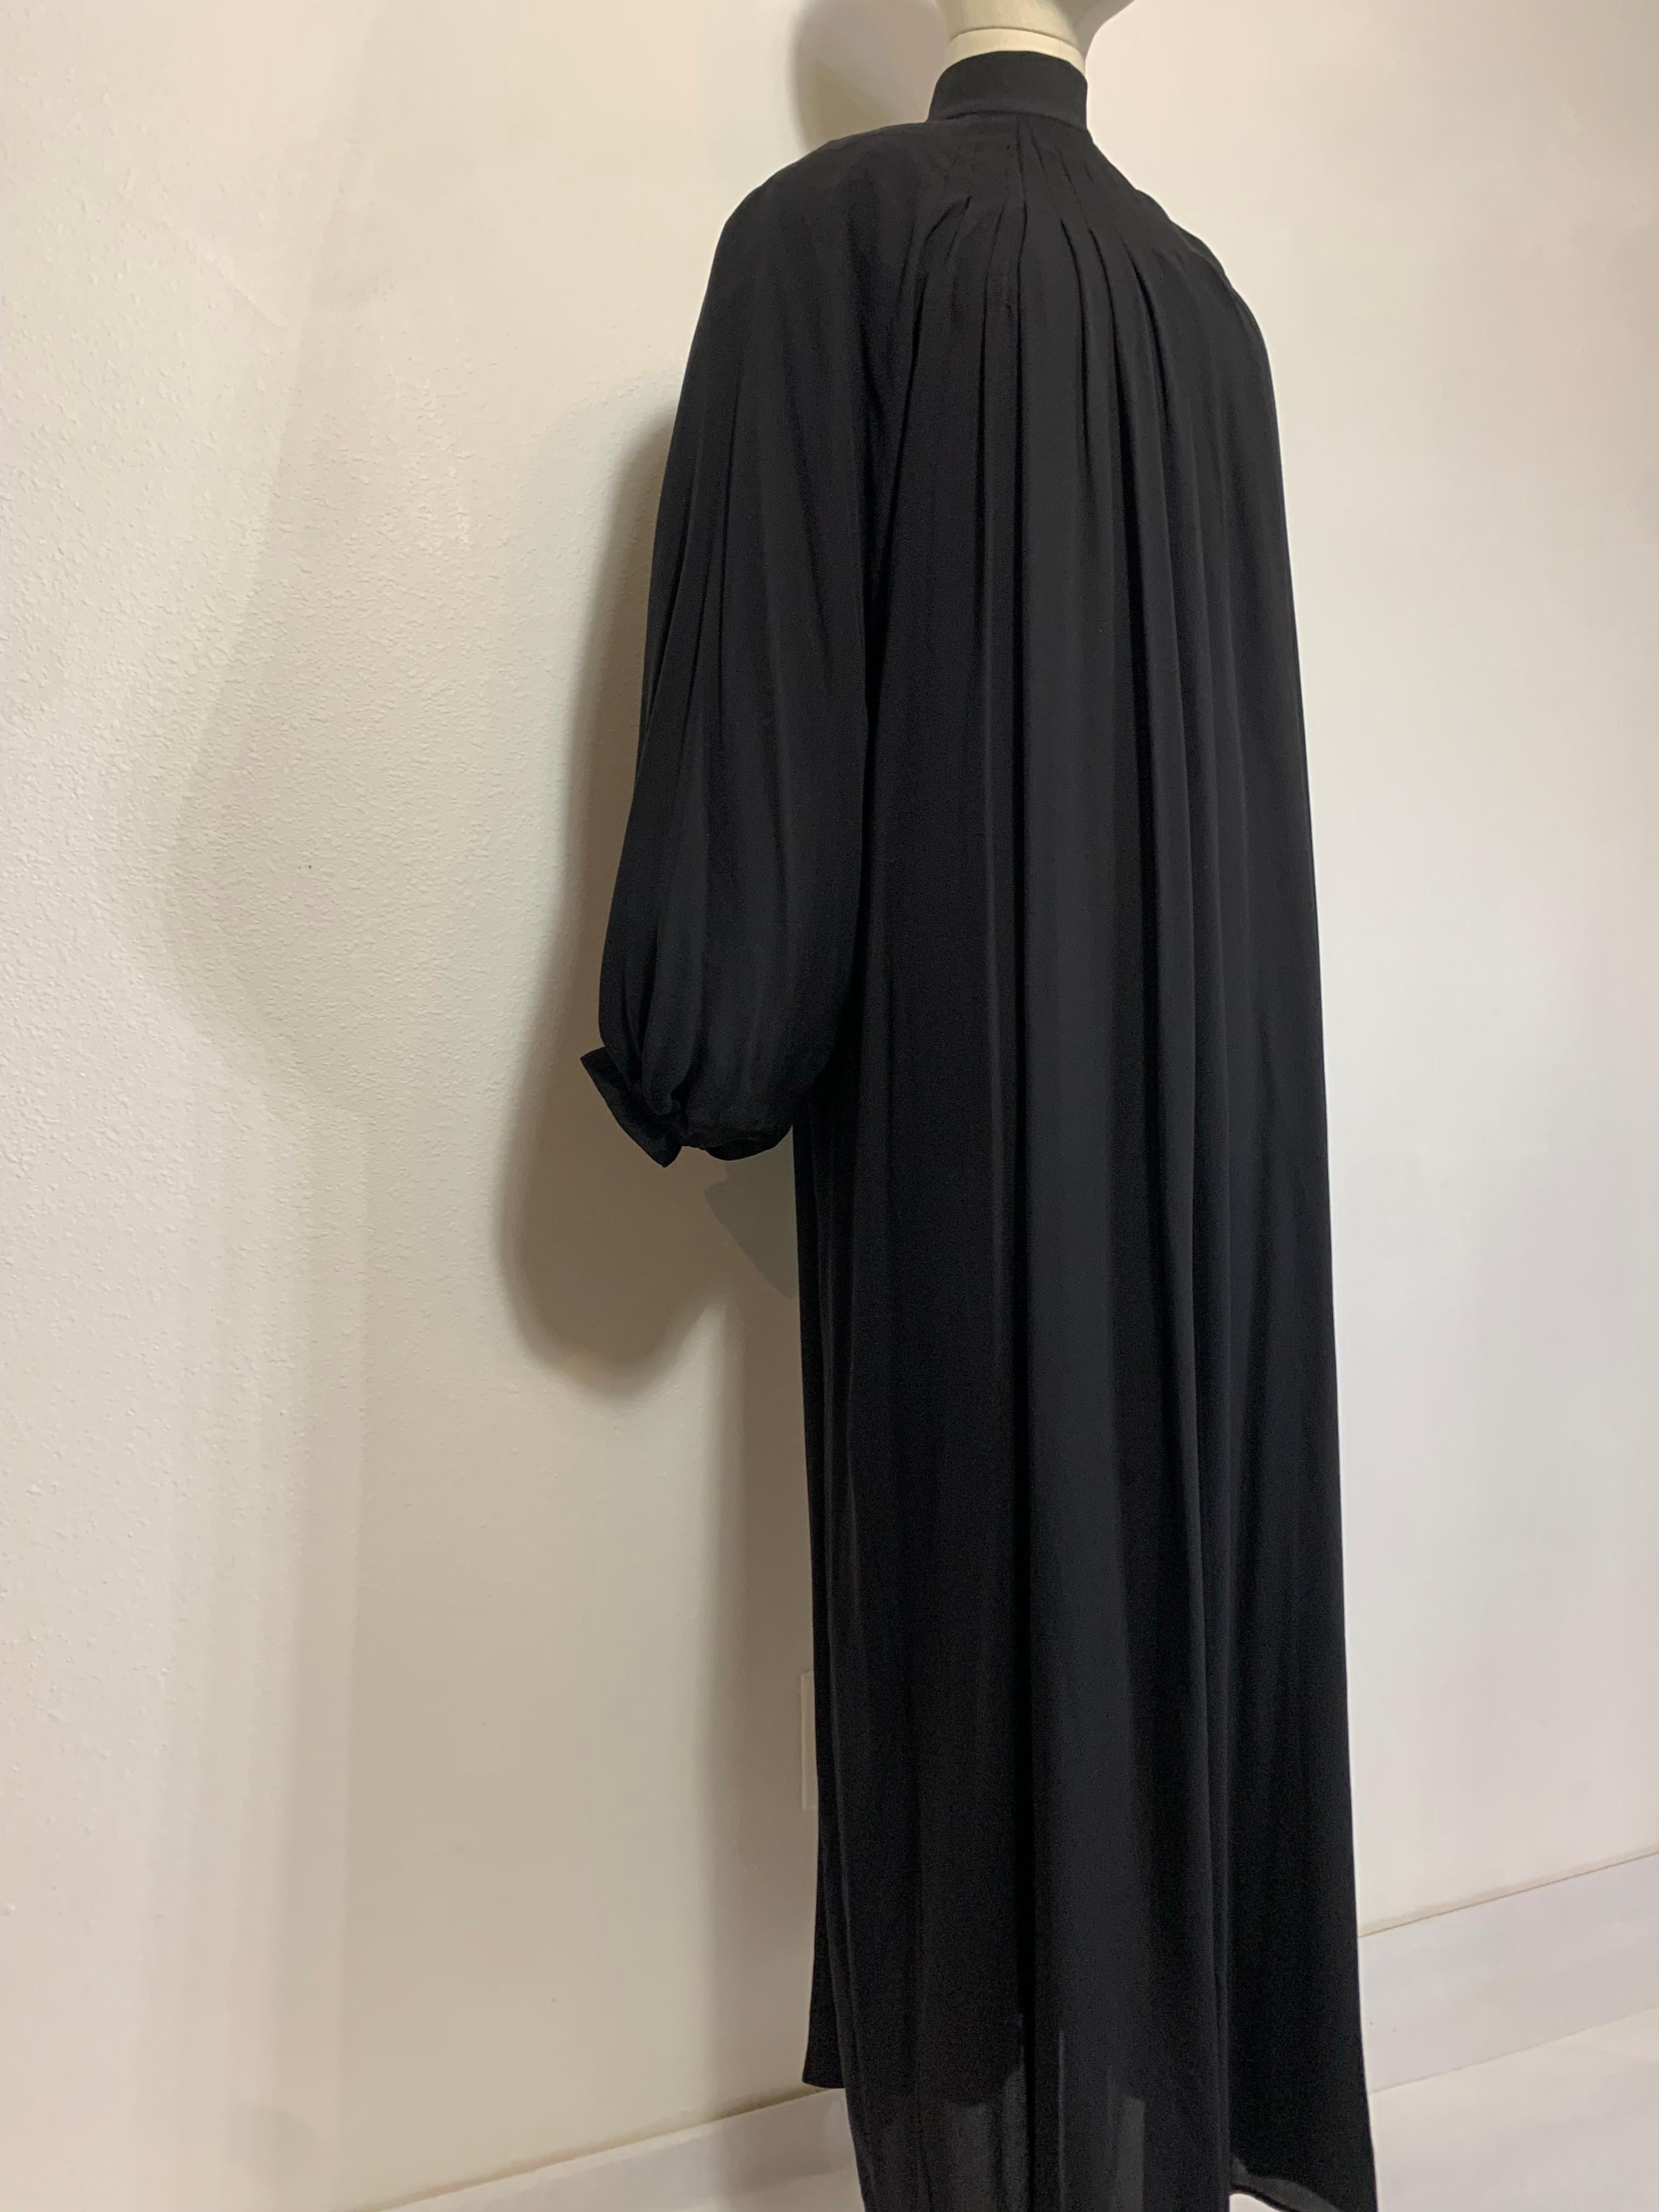 Andrew Gn Black Silk Crepe Monastic-Styled Maxi Dress w Full Pleats & High Neck  For Sale 10